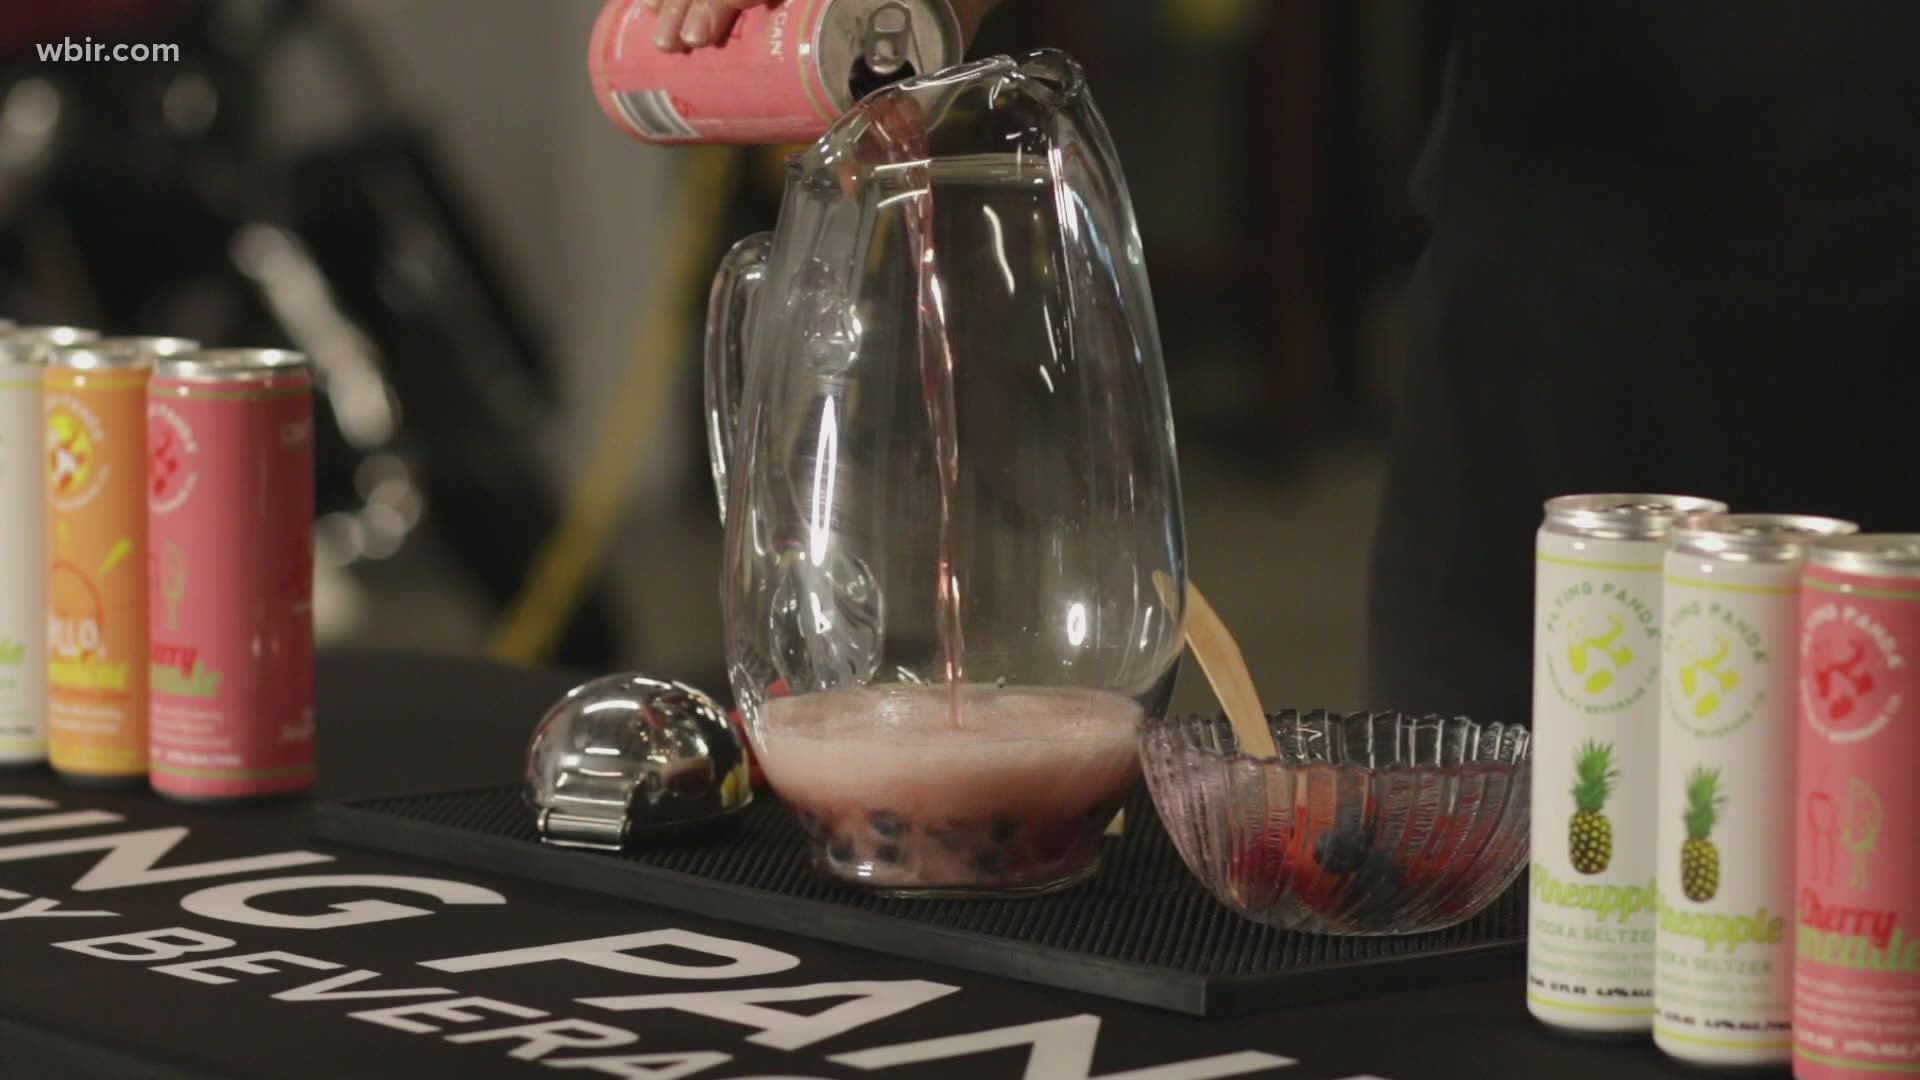 Flying Panda Specialty Beverage Company shows us how to make a festive 4th of July drink for adults.